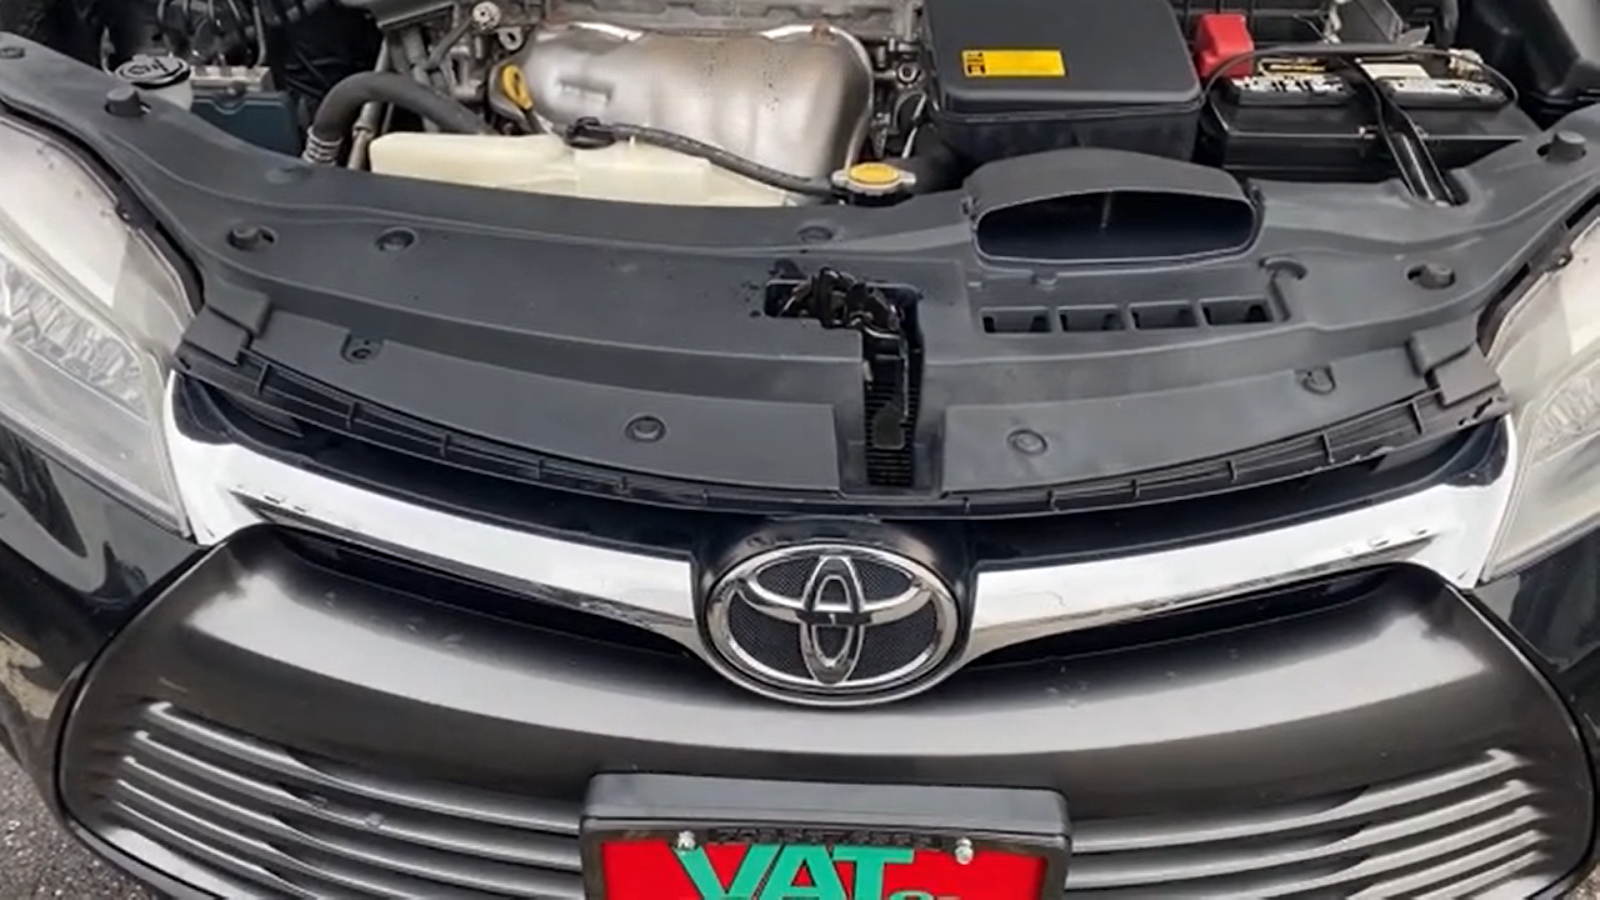 Troubleshooting Guide: Toyota Camry Hood Refusal to Open